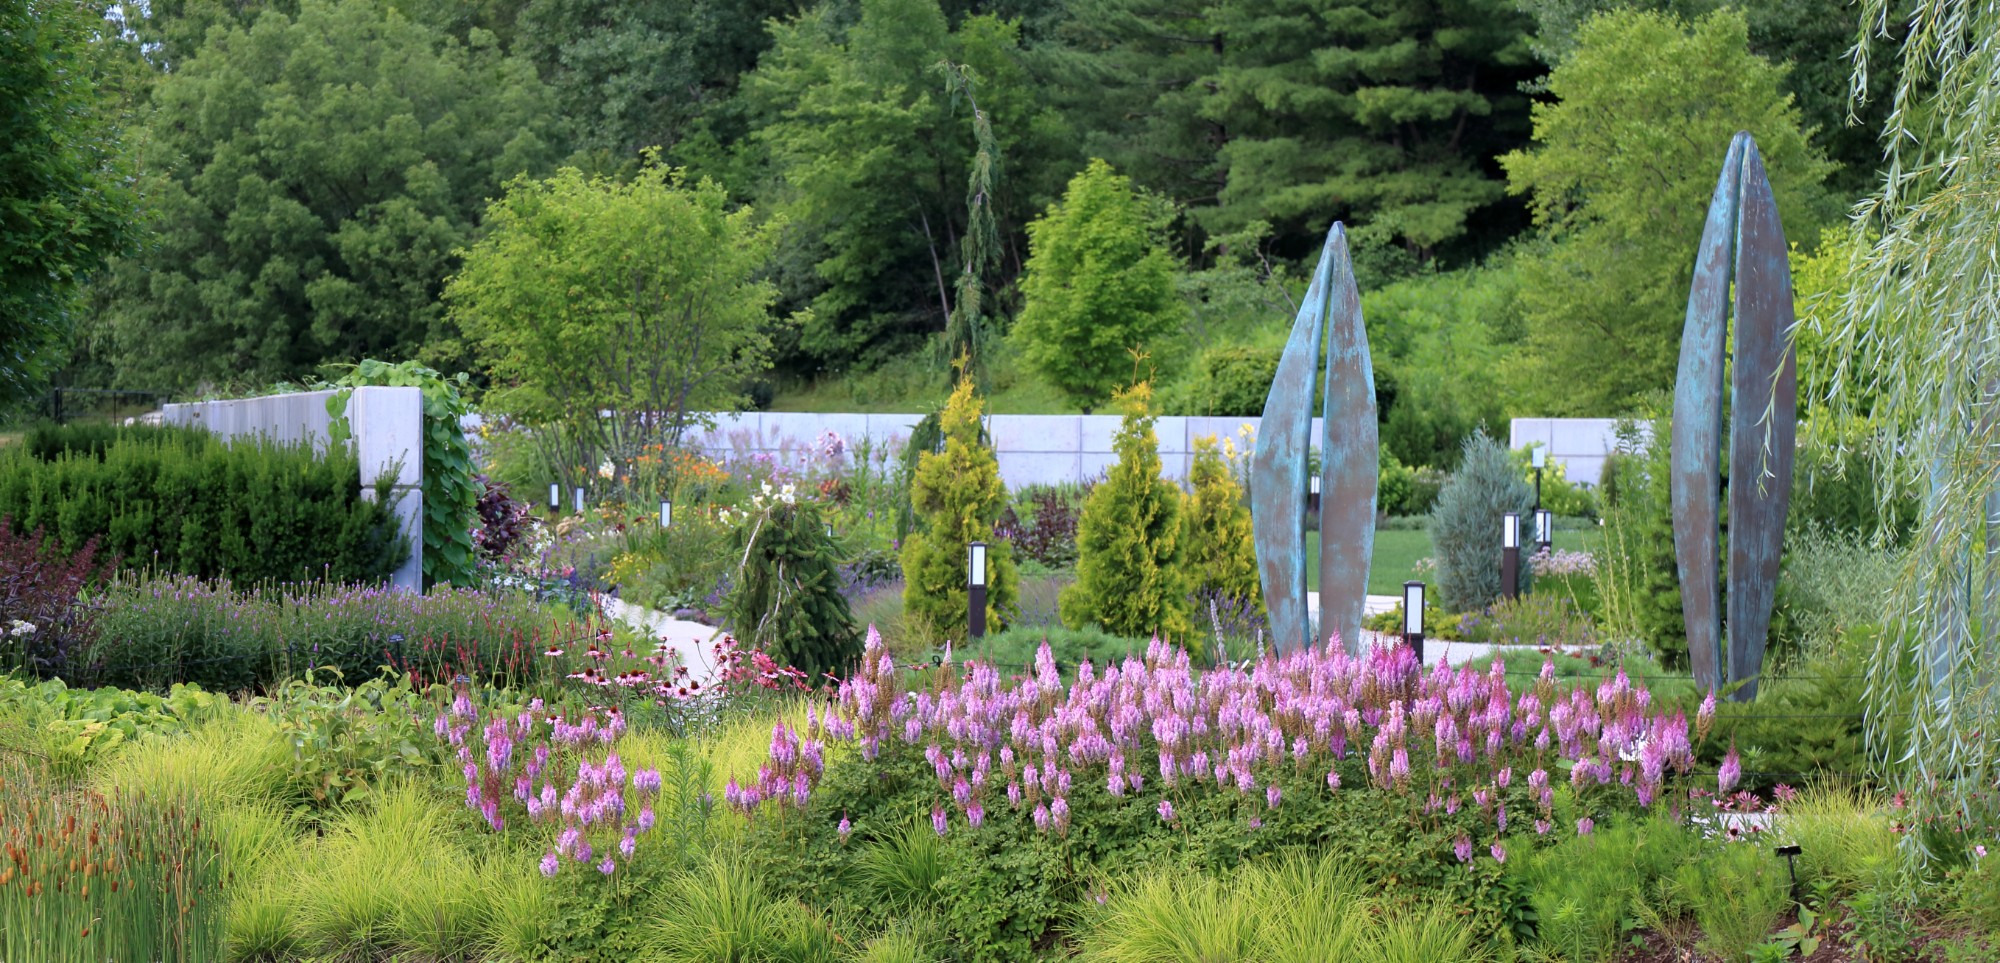 Looking northeast towards Persona I, II and III and the Koehn Garden in the background, July 7. Photo by Kelly Norris.